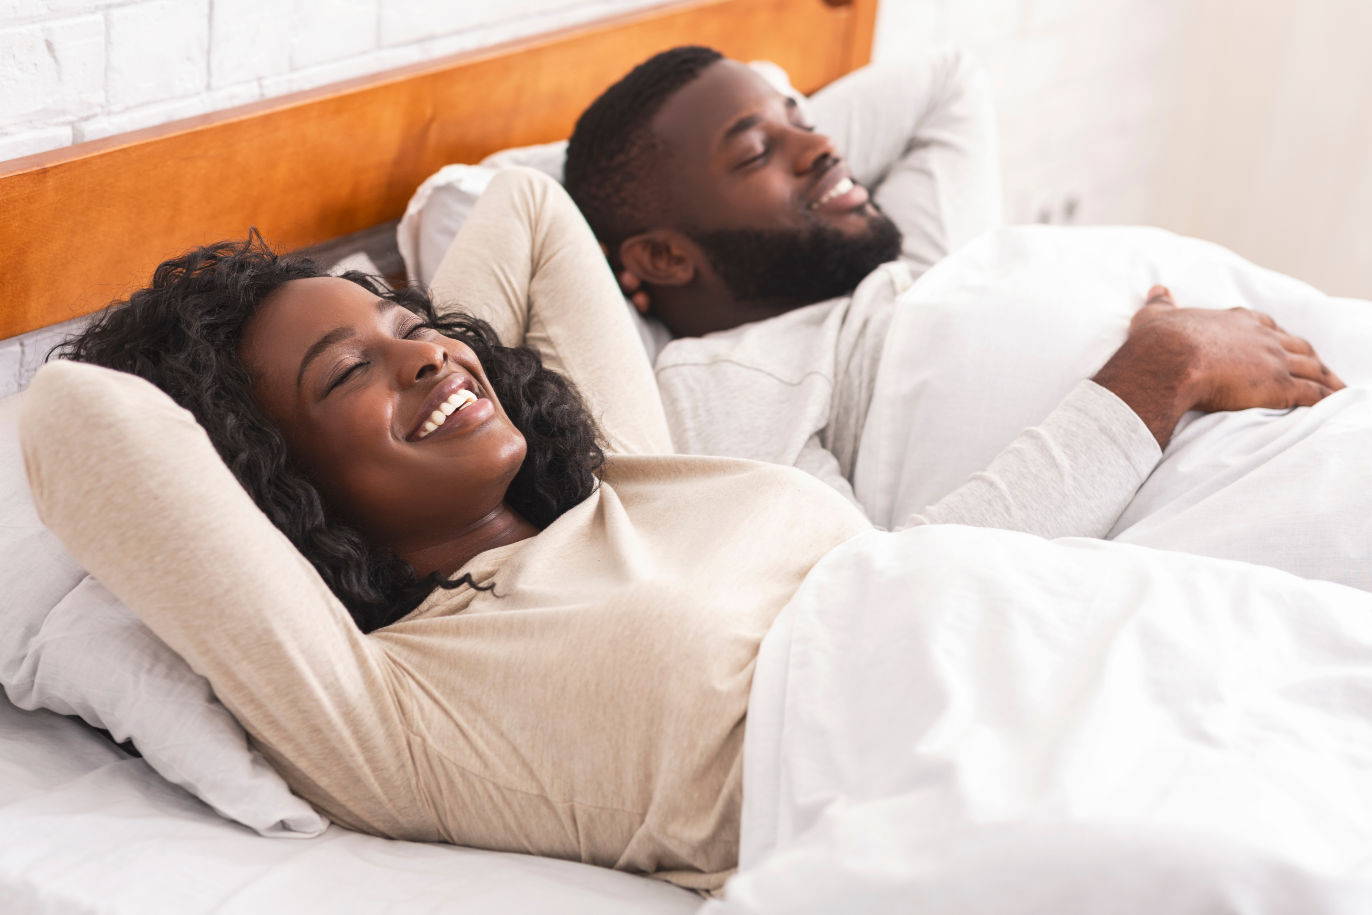 A couple sitting on a ergo-pedic sleepbed with smiles on their faces after sex